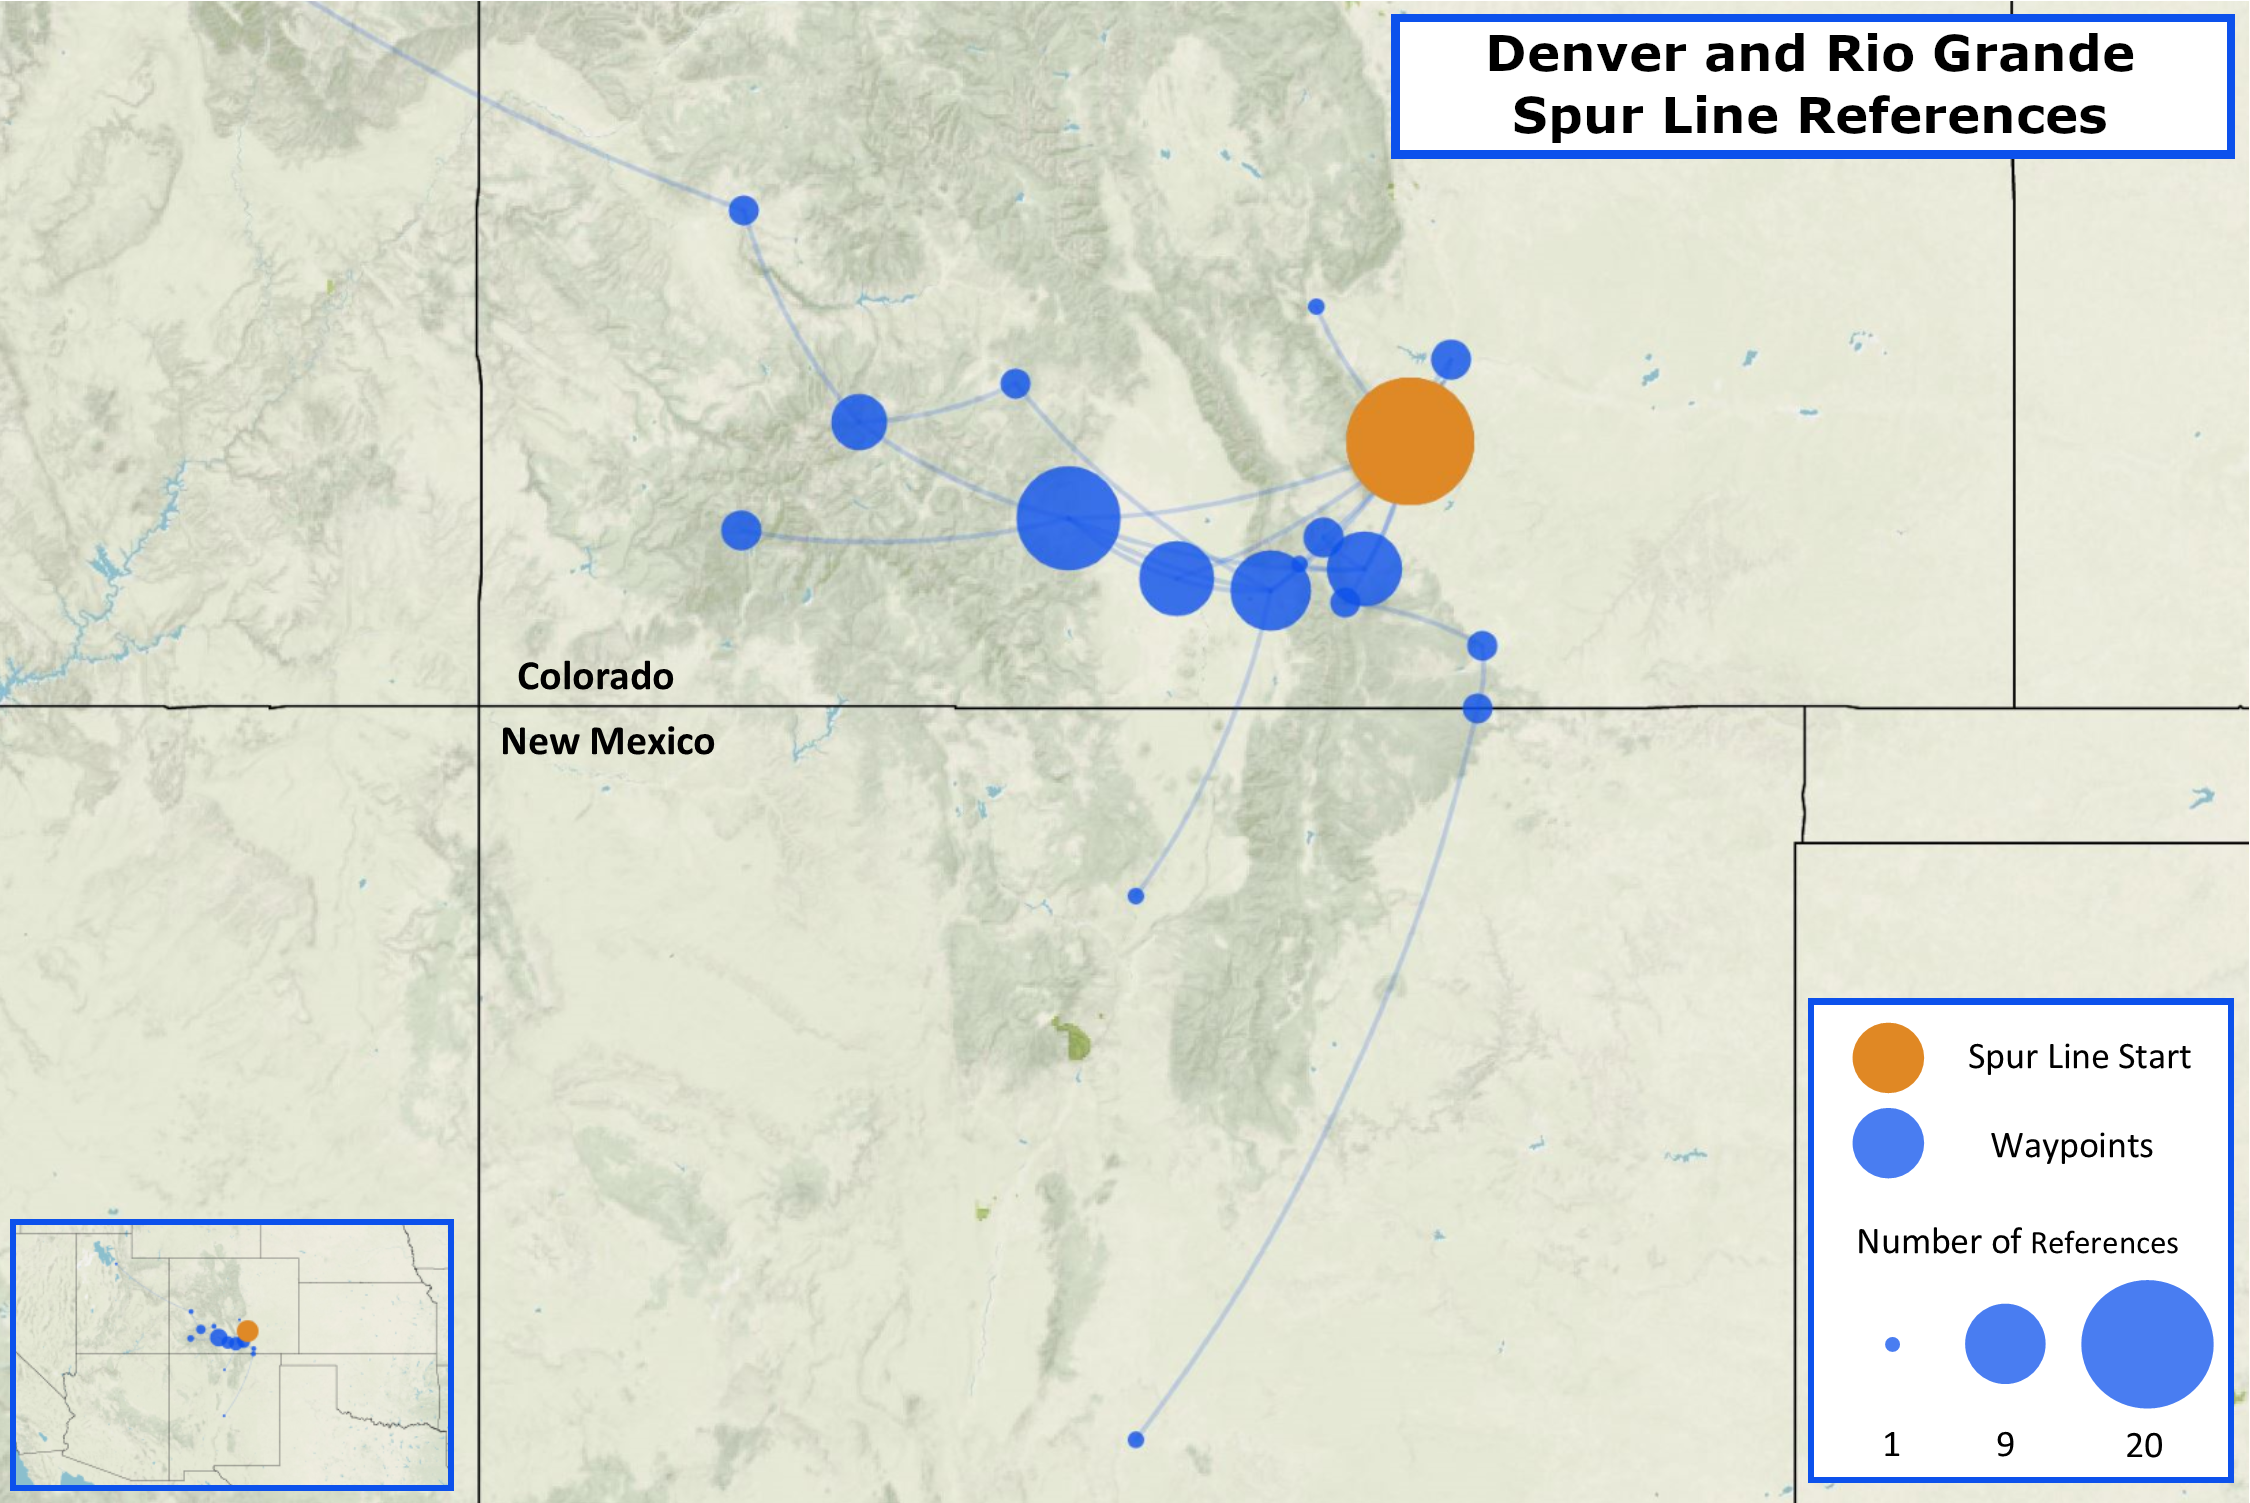 Map of southern Colorado and northern New Mexico, showing Denver and Rio Grande spur line references. A orange circle indcates the location where the spur line began. Blue circles indicate locations of waypoints. The circles increase in size to indicate a greater number of references.